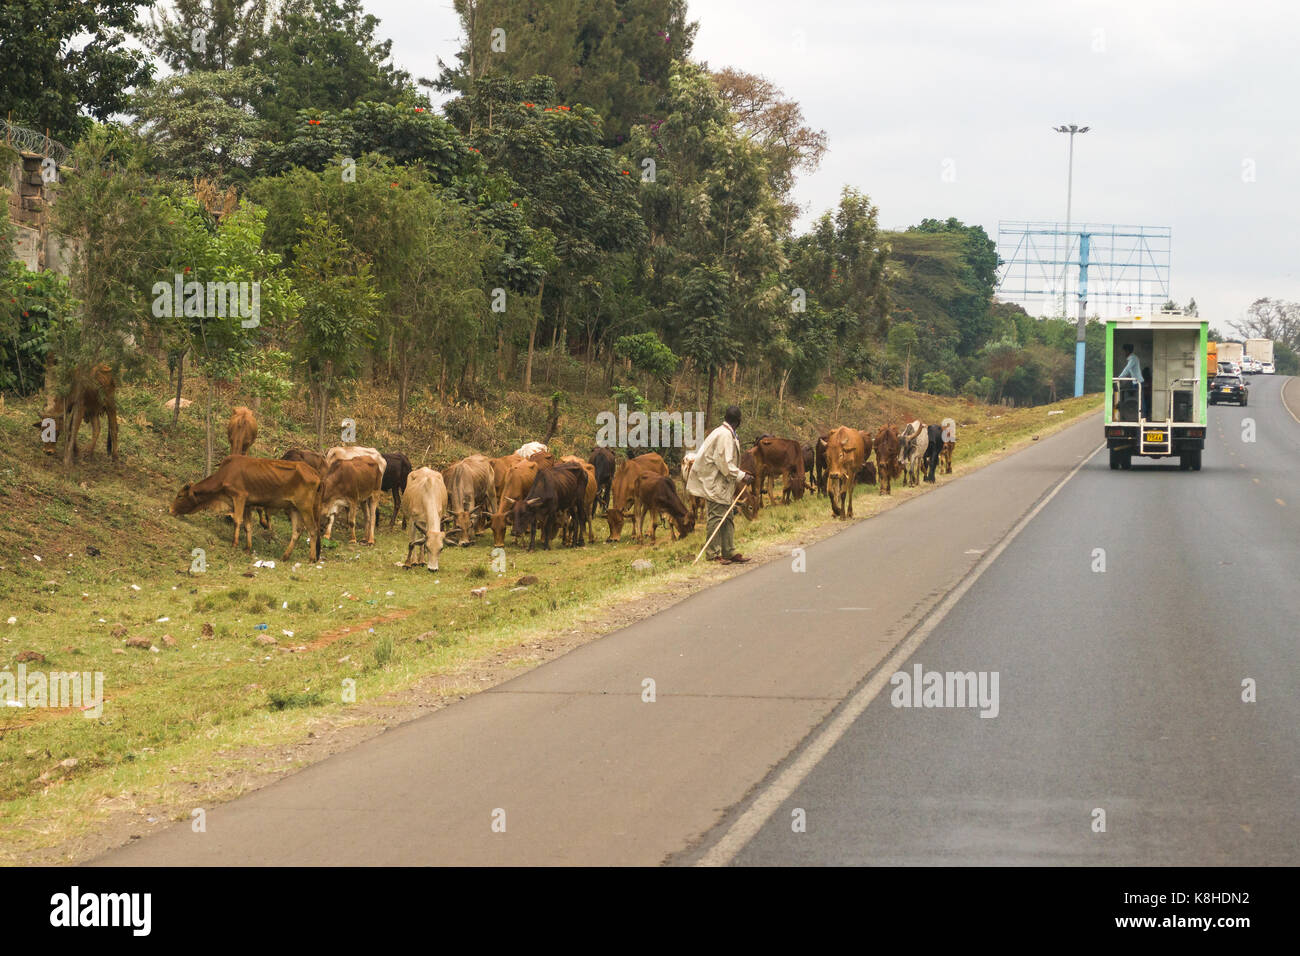 Shepherd with herd of cows on roadside grazing on grass as vehicles drive past, Kenya Stock Photo